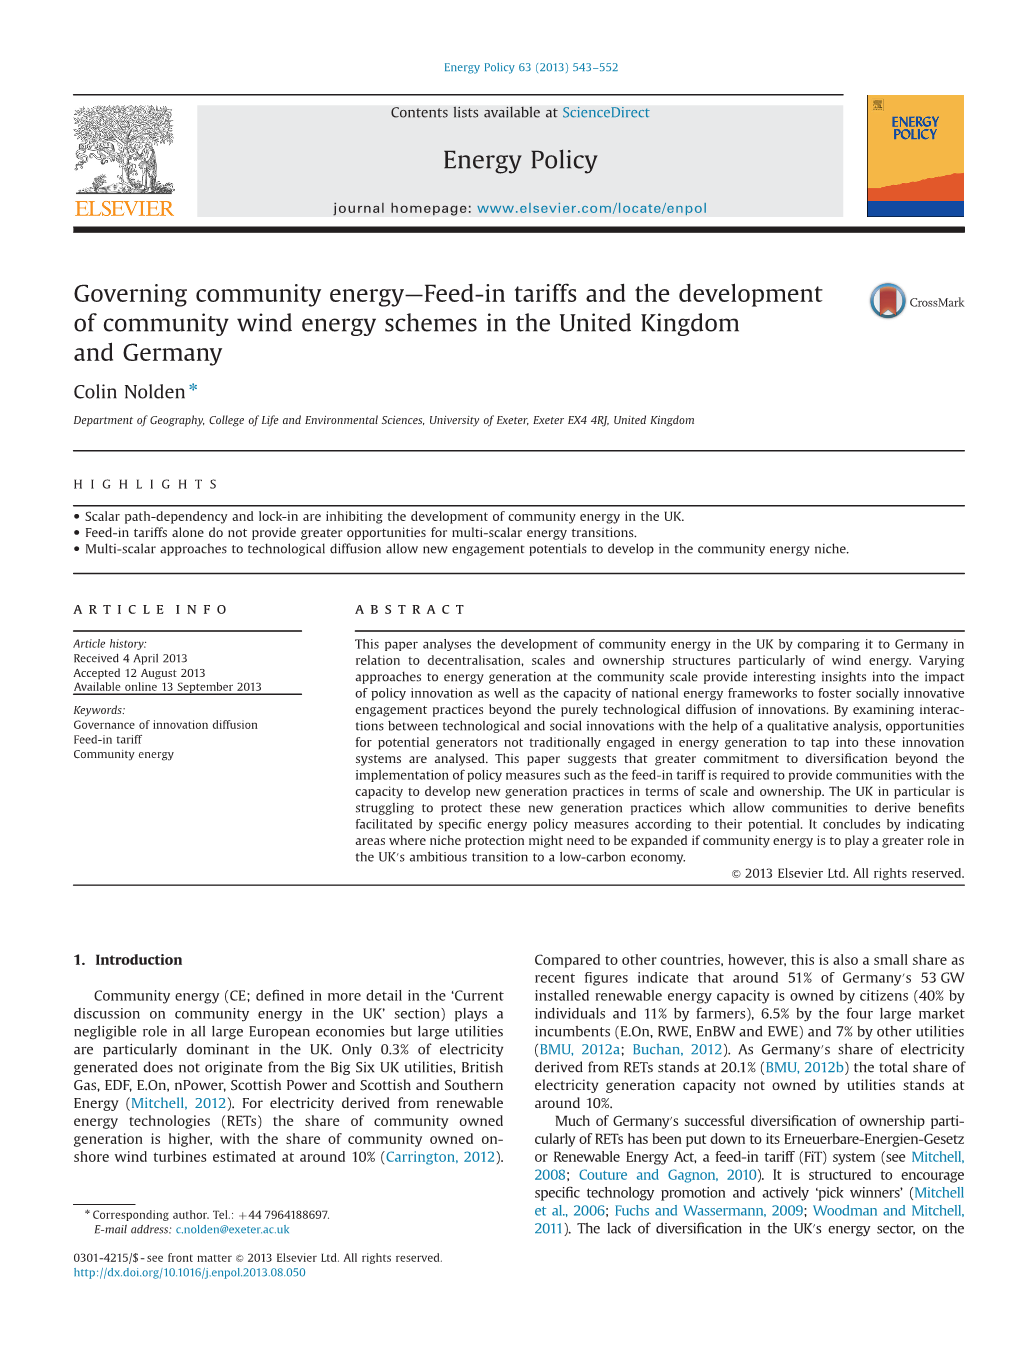 Governing Community Energy—Feed-In Tariffs and the Development of Community Wind Energy Schemes in the United Kingdom and Germany